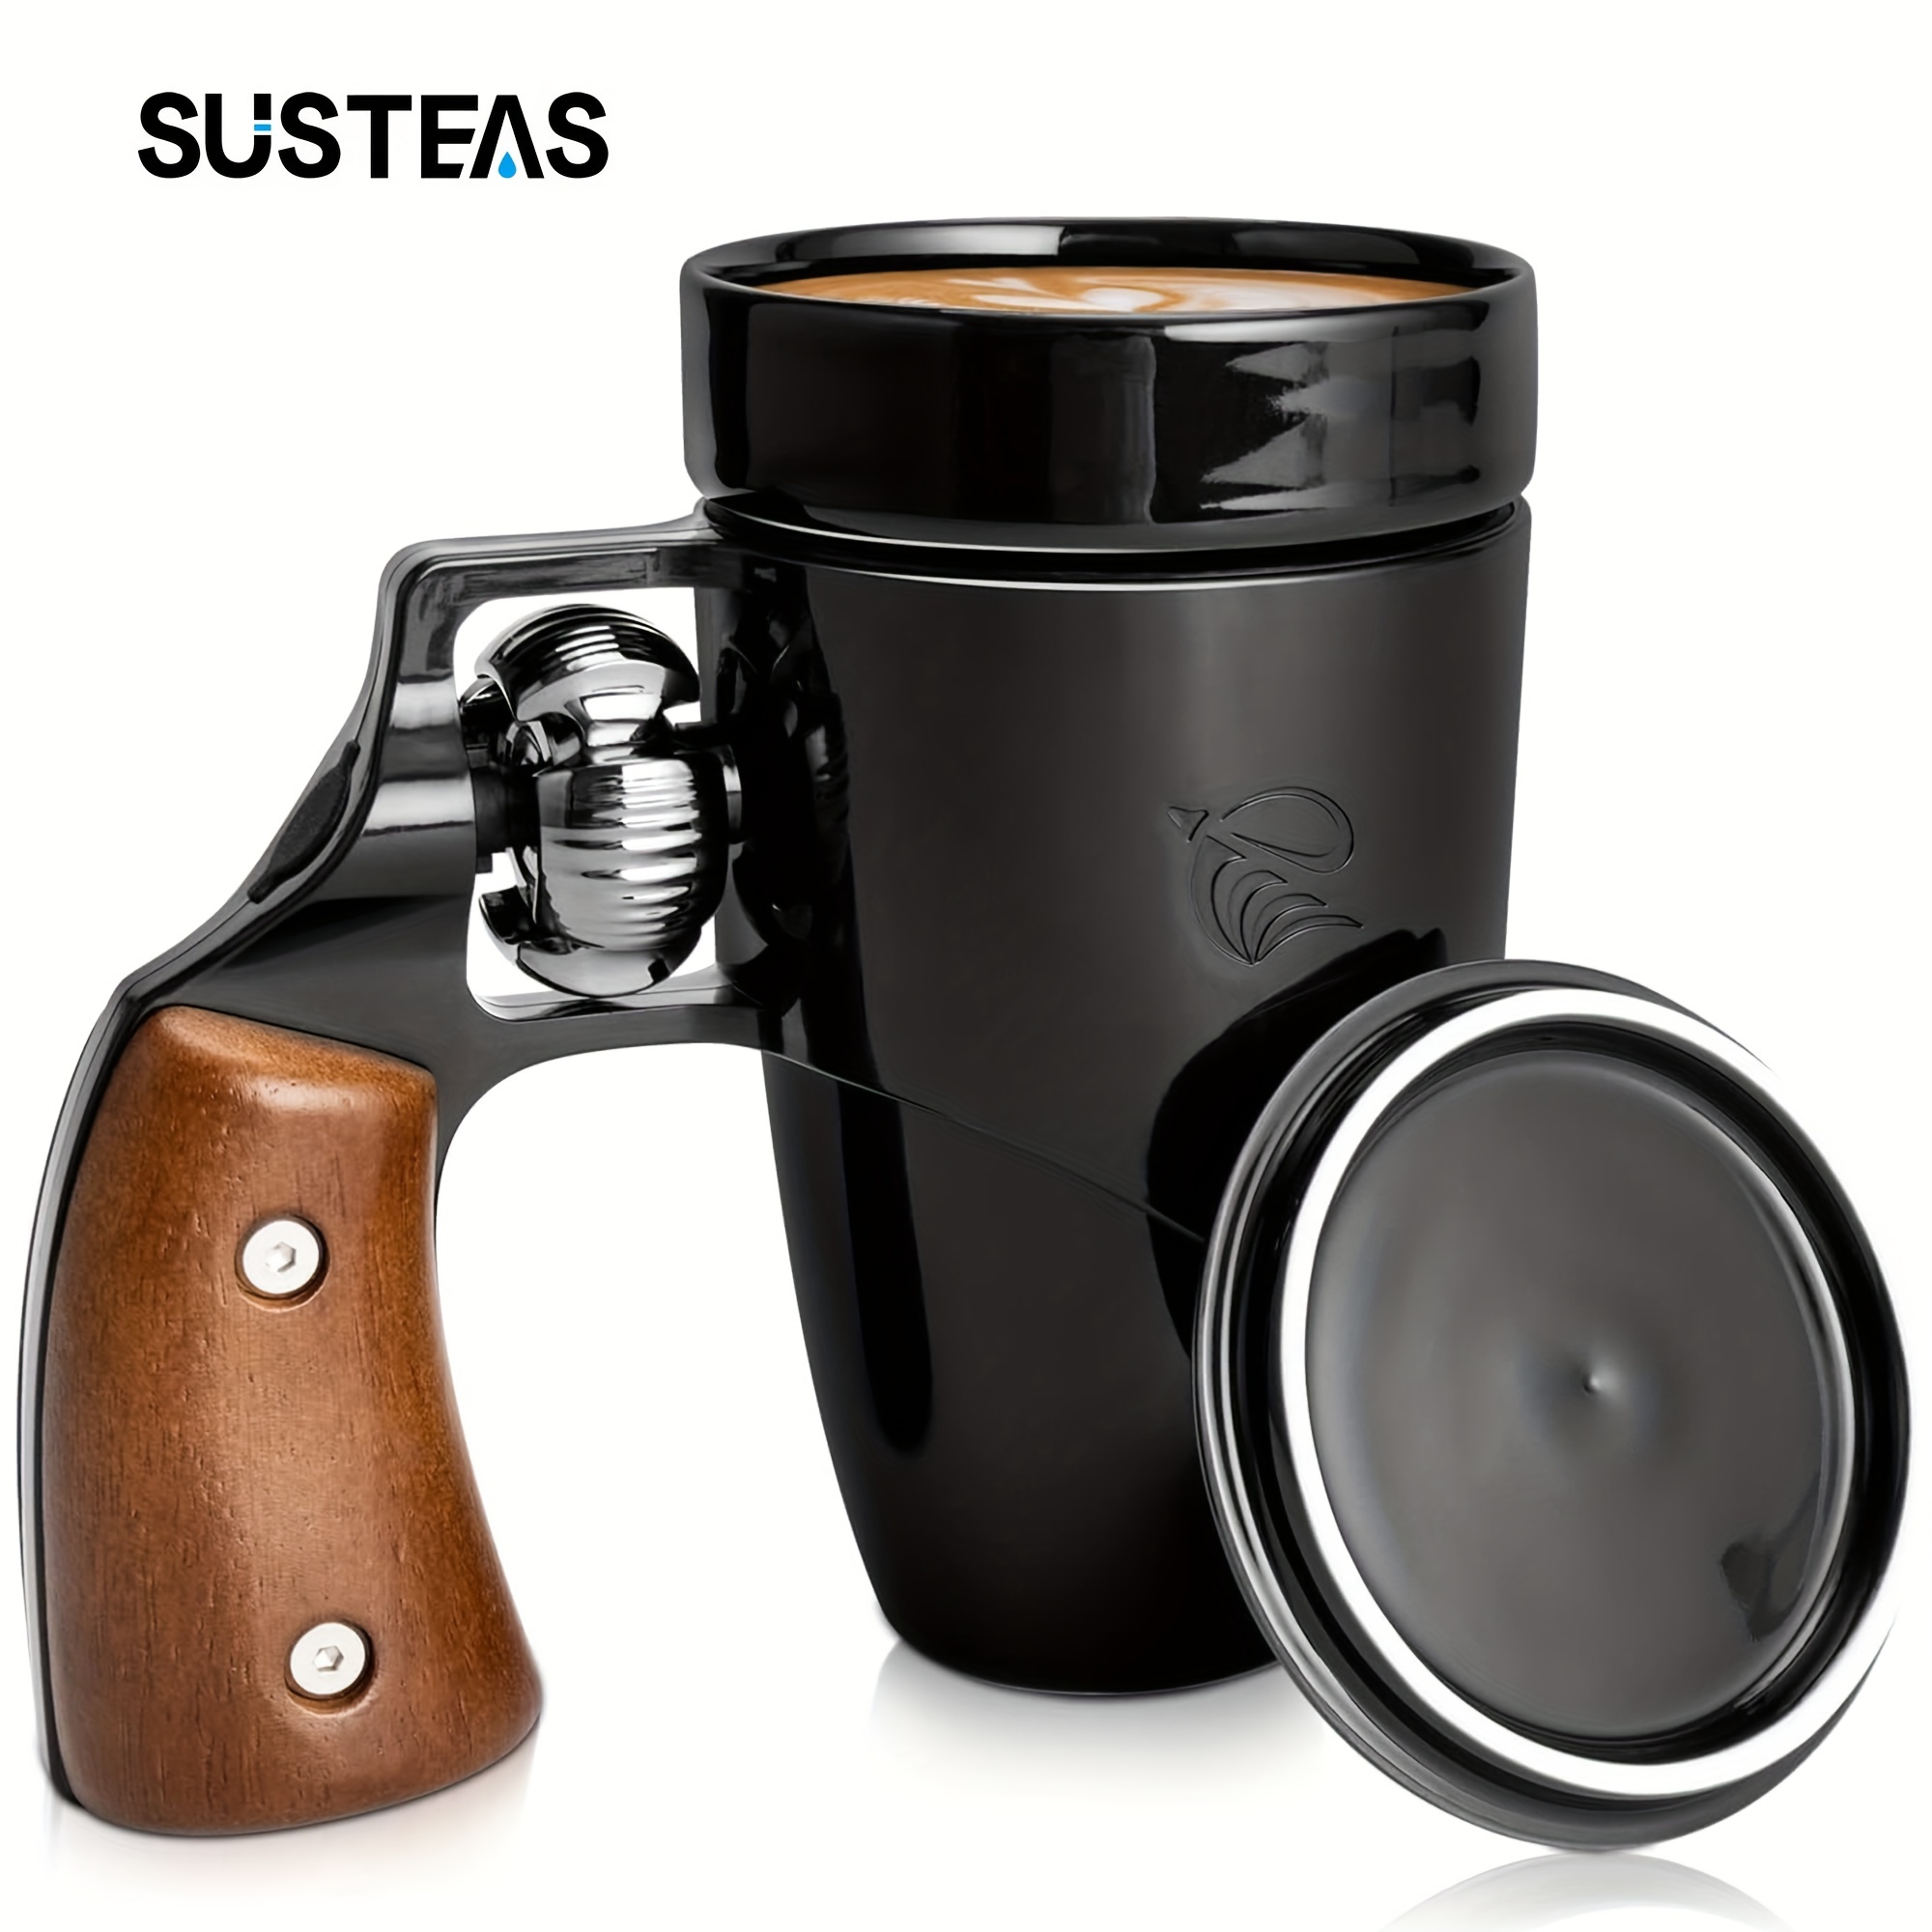 

Susteas Novelty Ceramic Coffee Mug, Birthday Gifts For Men And Women, Fathes Gifts, Gun Coffee Mugs For Men (16oz) (black)